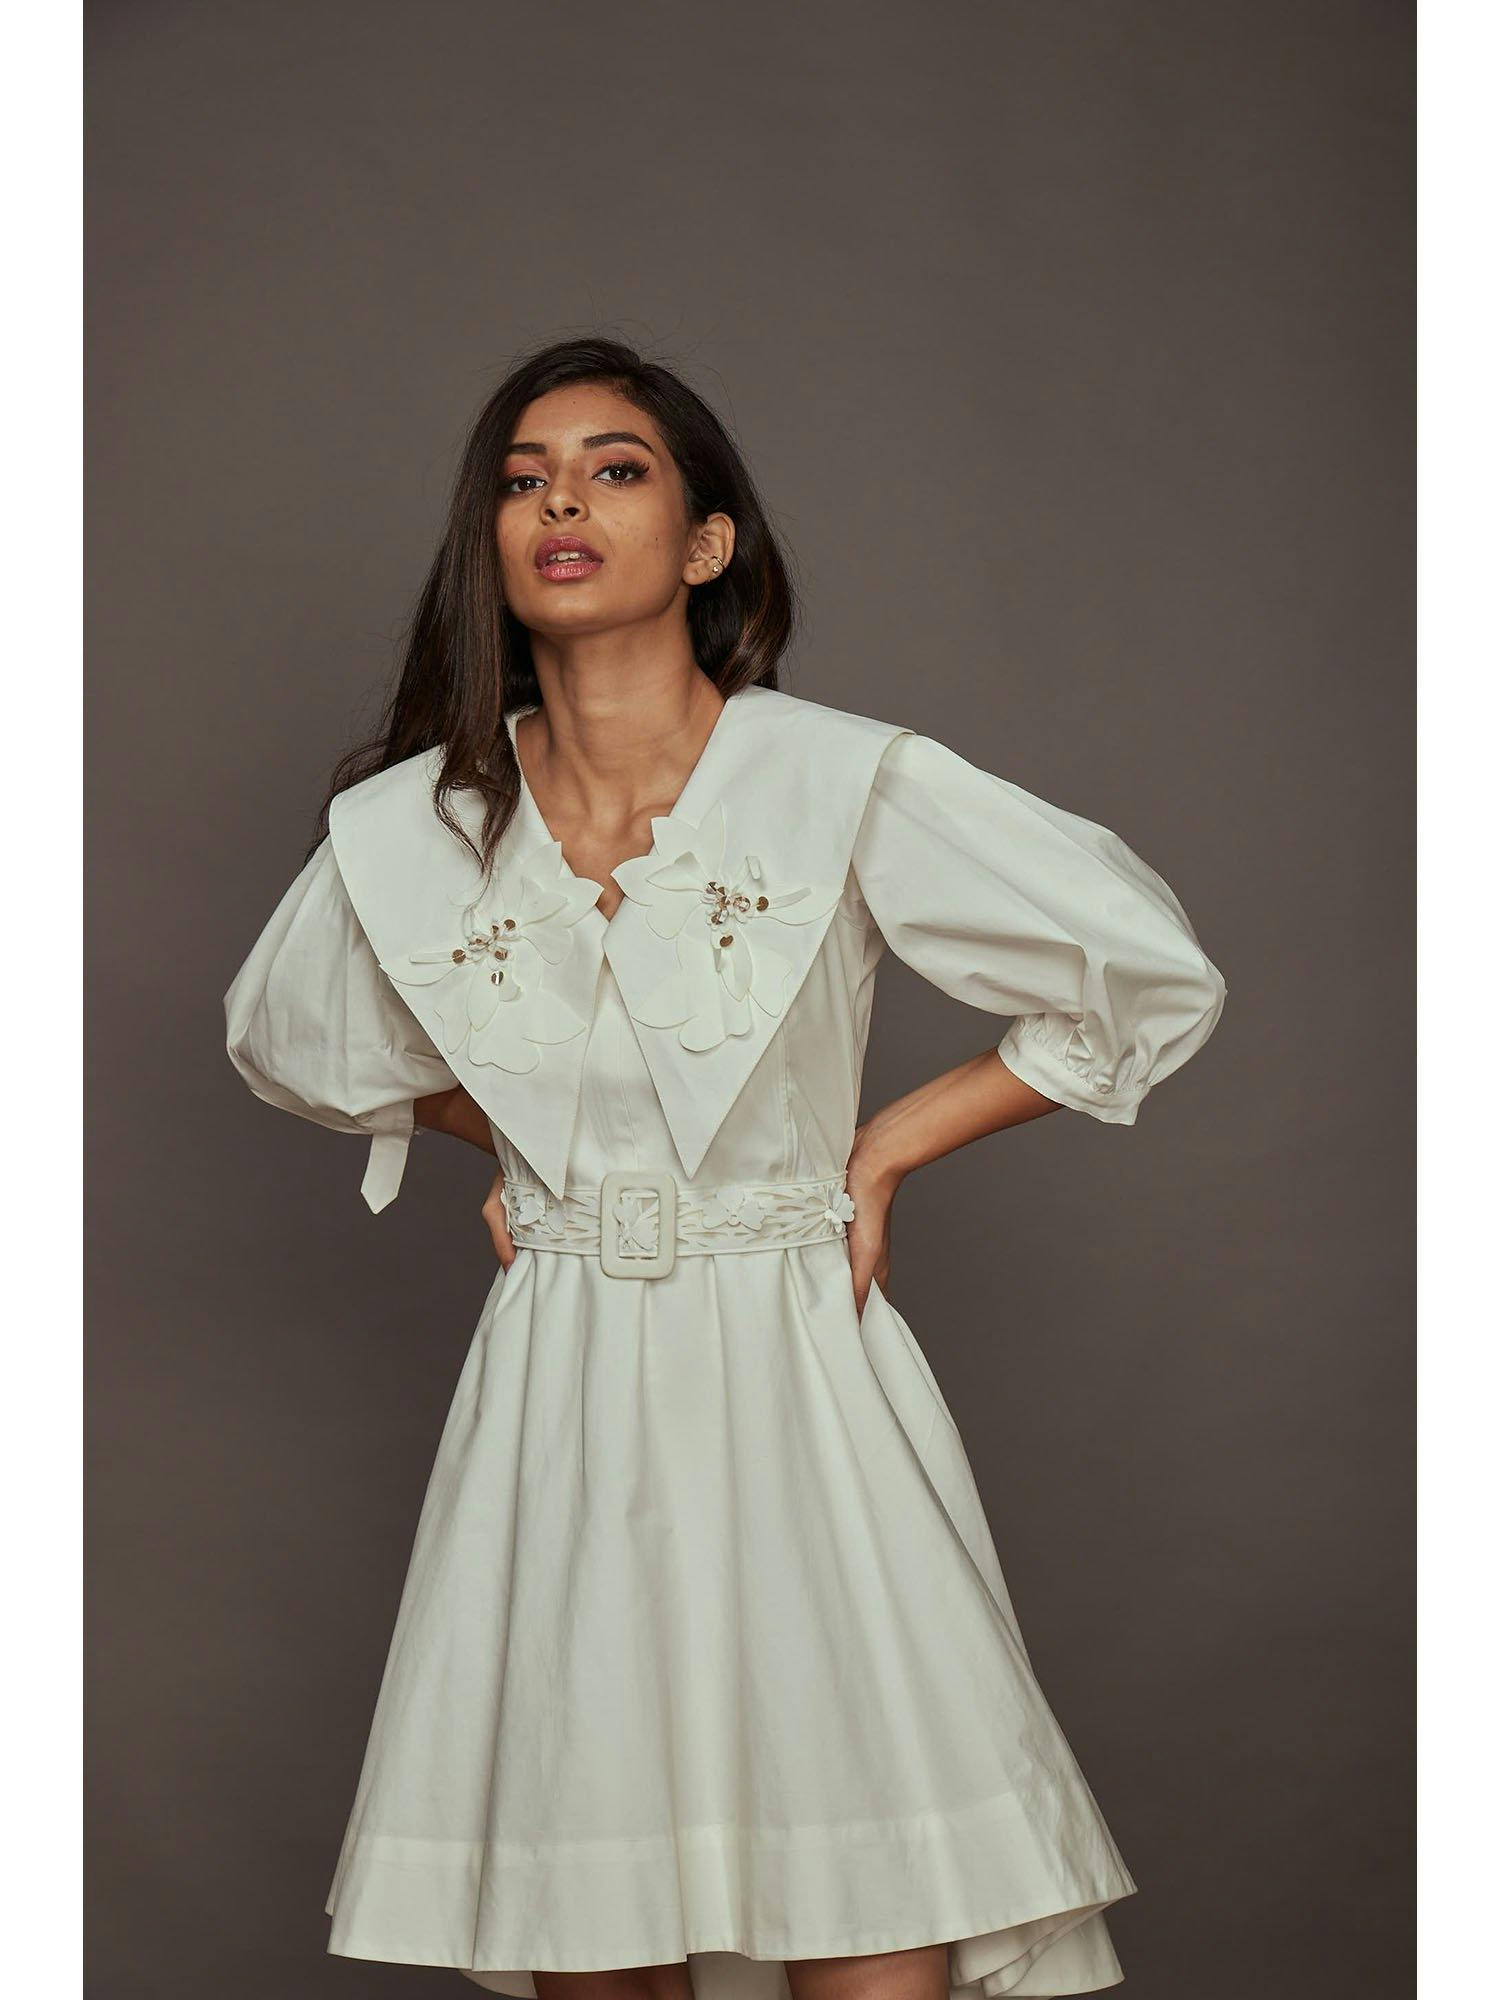 White dress with attached collar and belt NN-1129-W, a product by Deepika Arora